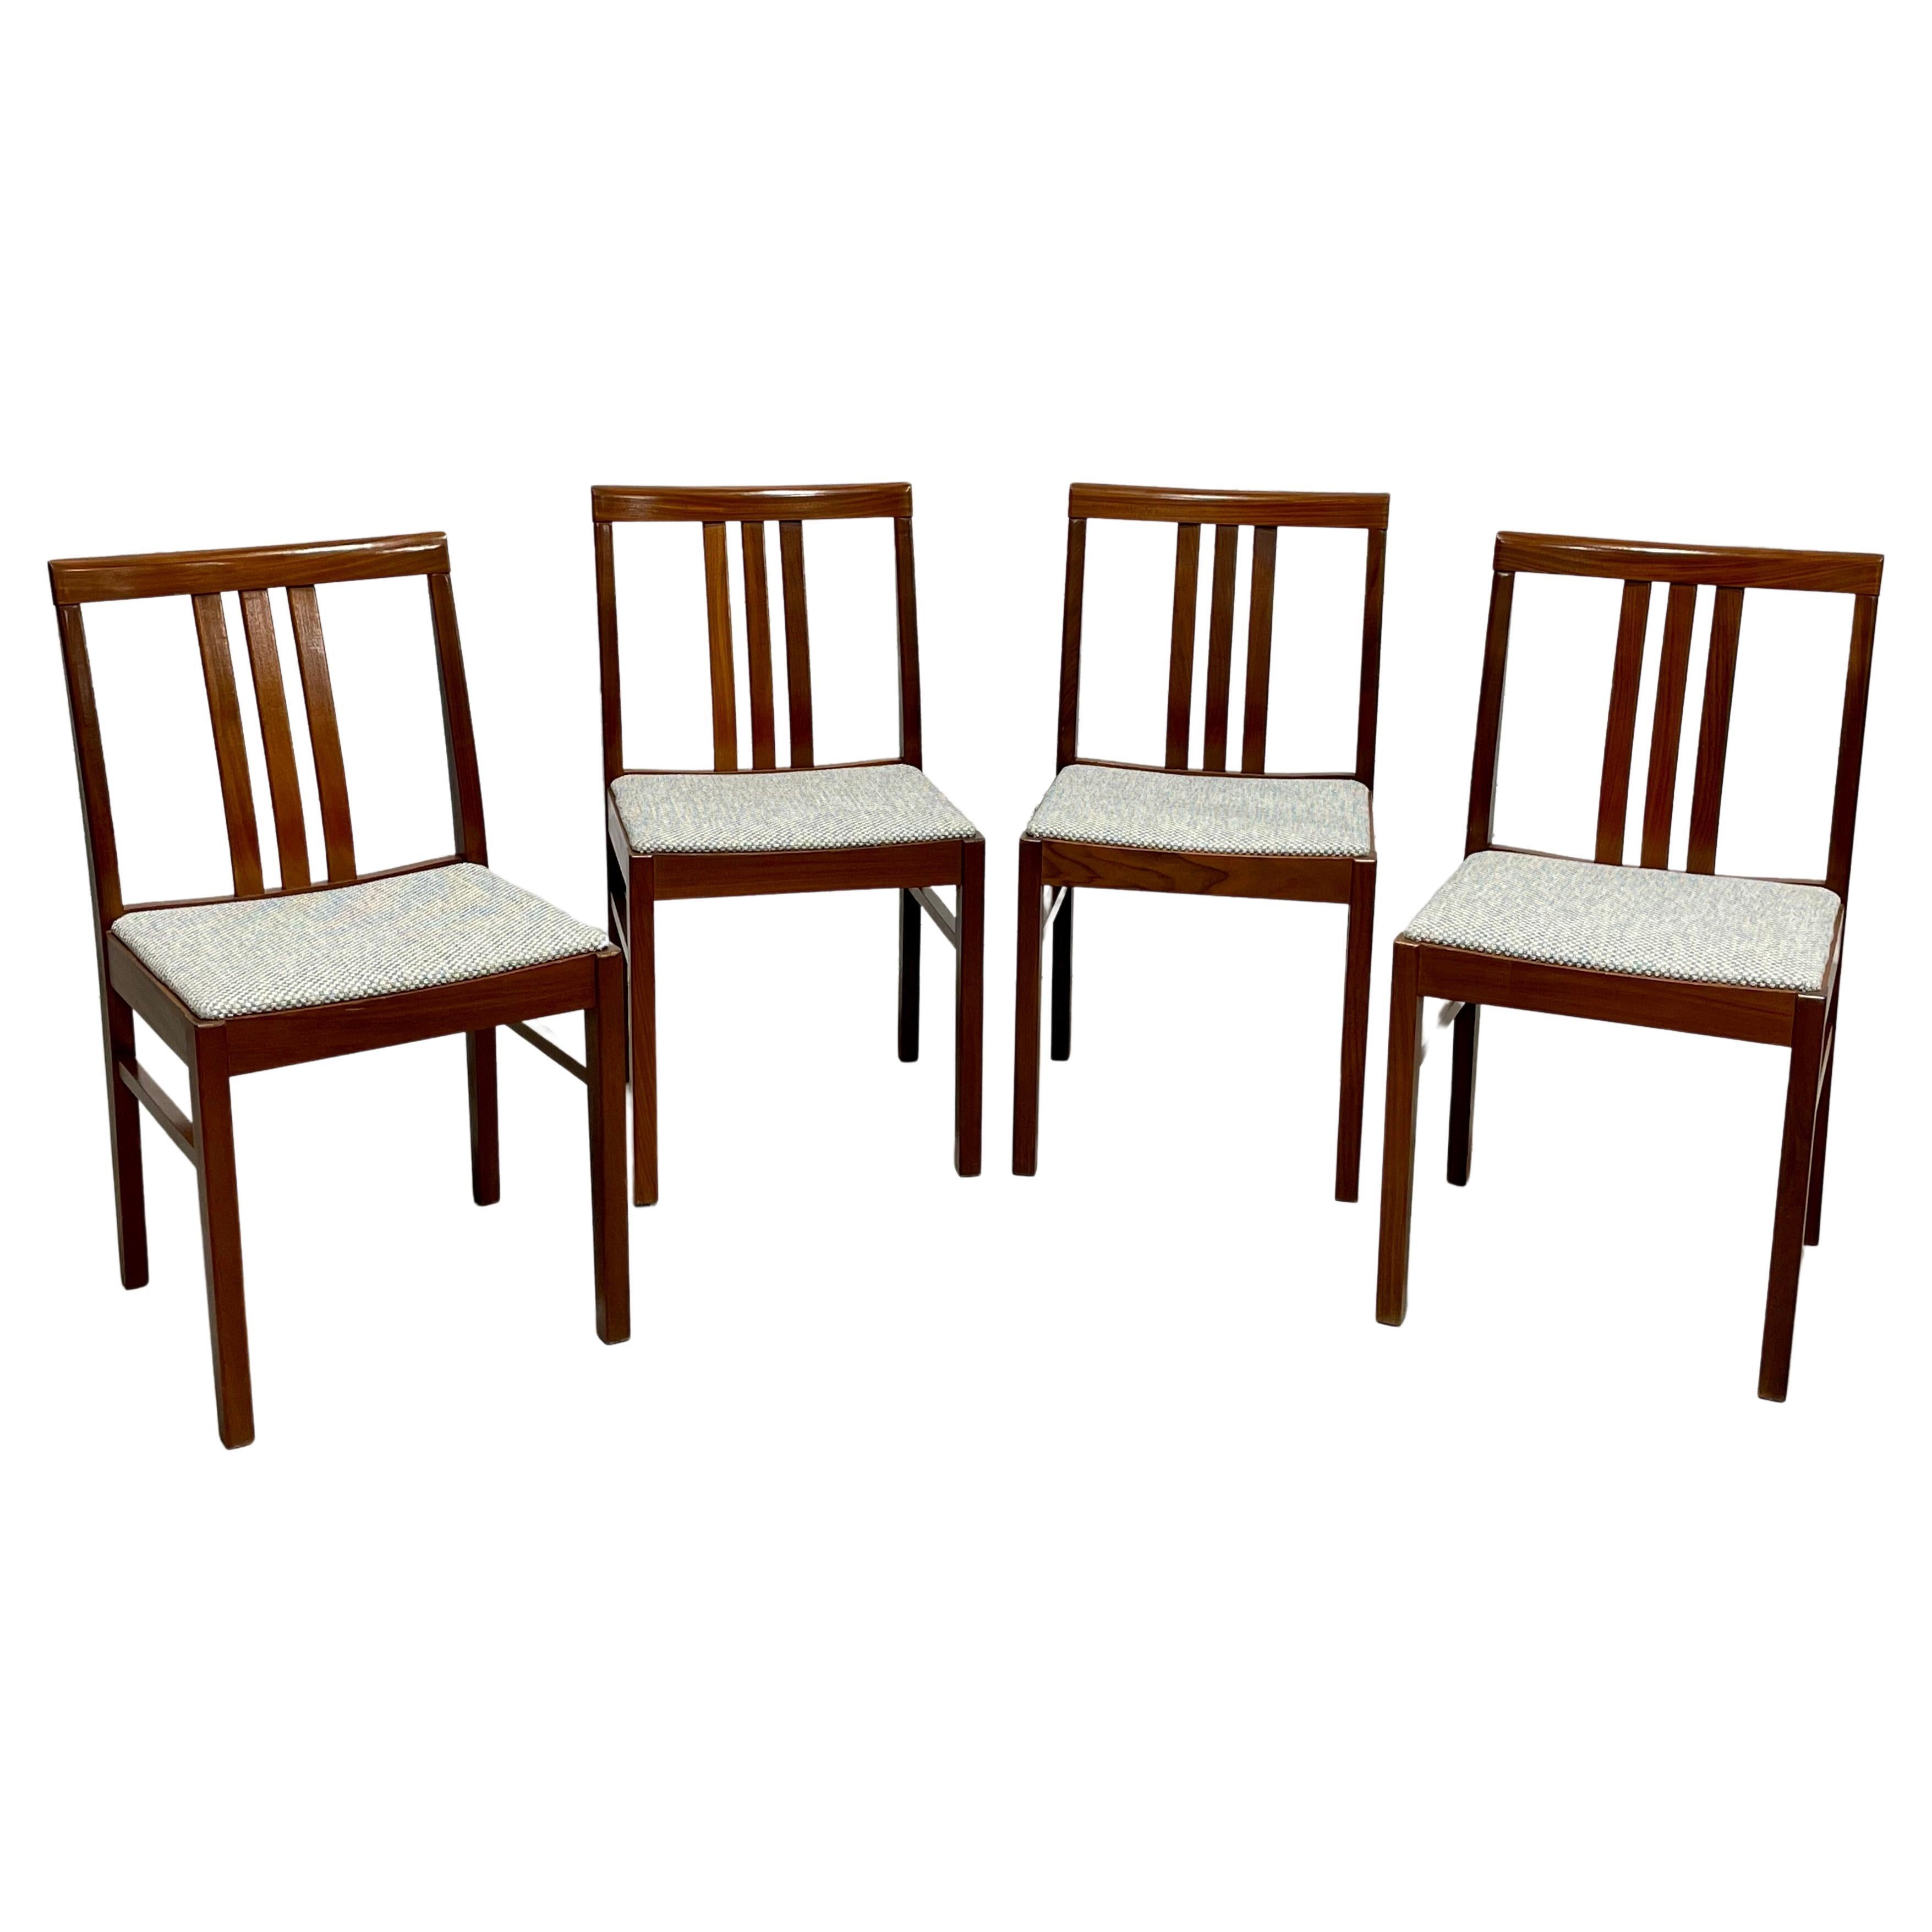 Set of four Mid Century Modern Dining Chairs, Made in Denmark.  These chairs have curves in all the right places with incredible wood grains that have been freshly cleaned and oiled. The chairs are newly reupholstered in a lovely cream/blue soft